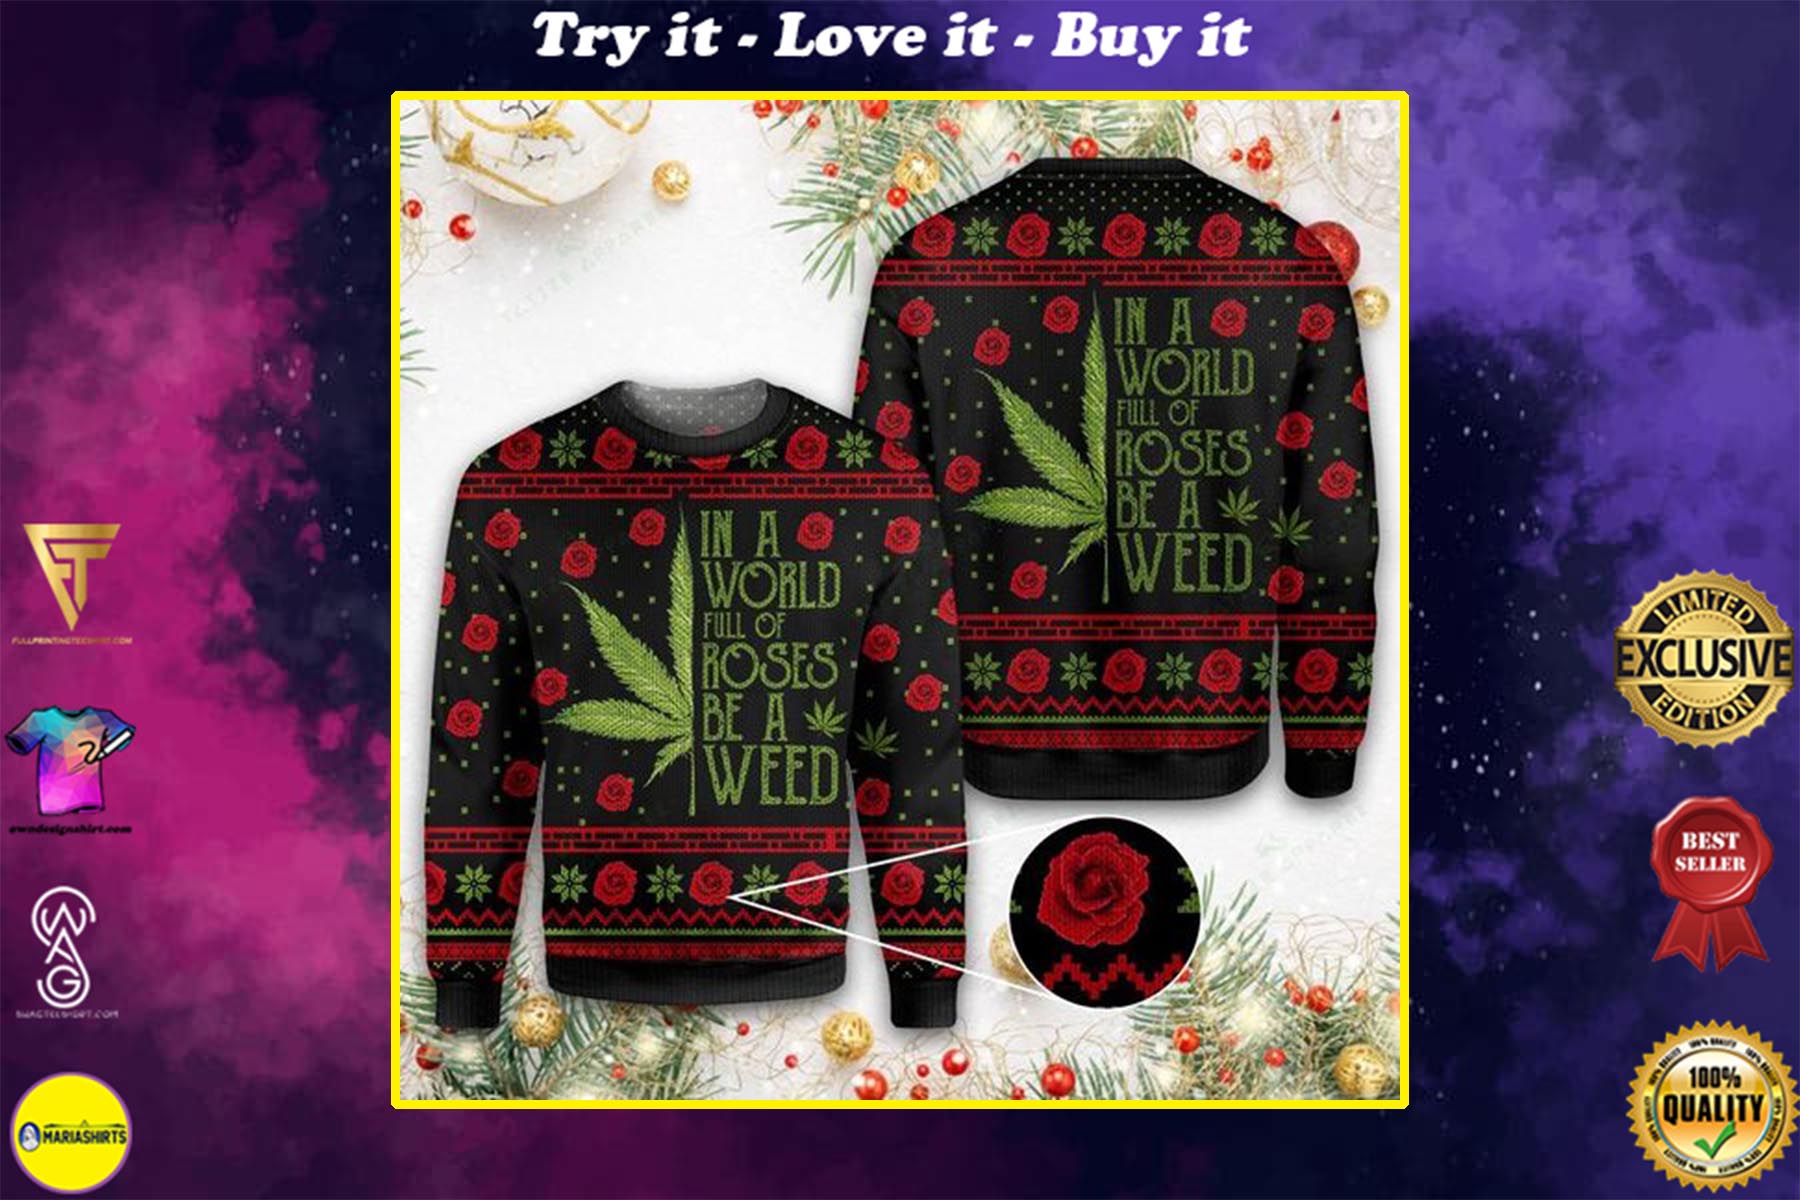 [special edition] christmas in a world full of roses be a weed all over printed ugly christmas sweater – maria